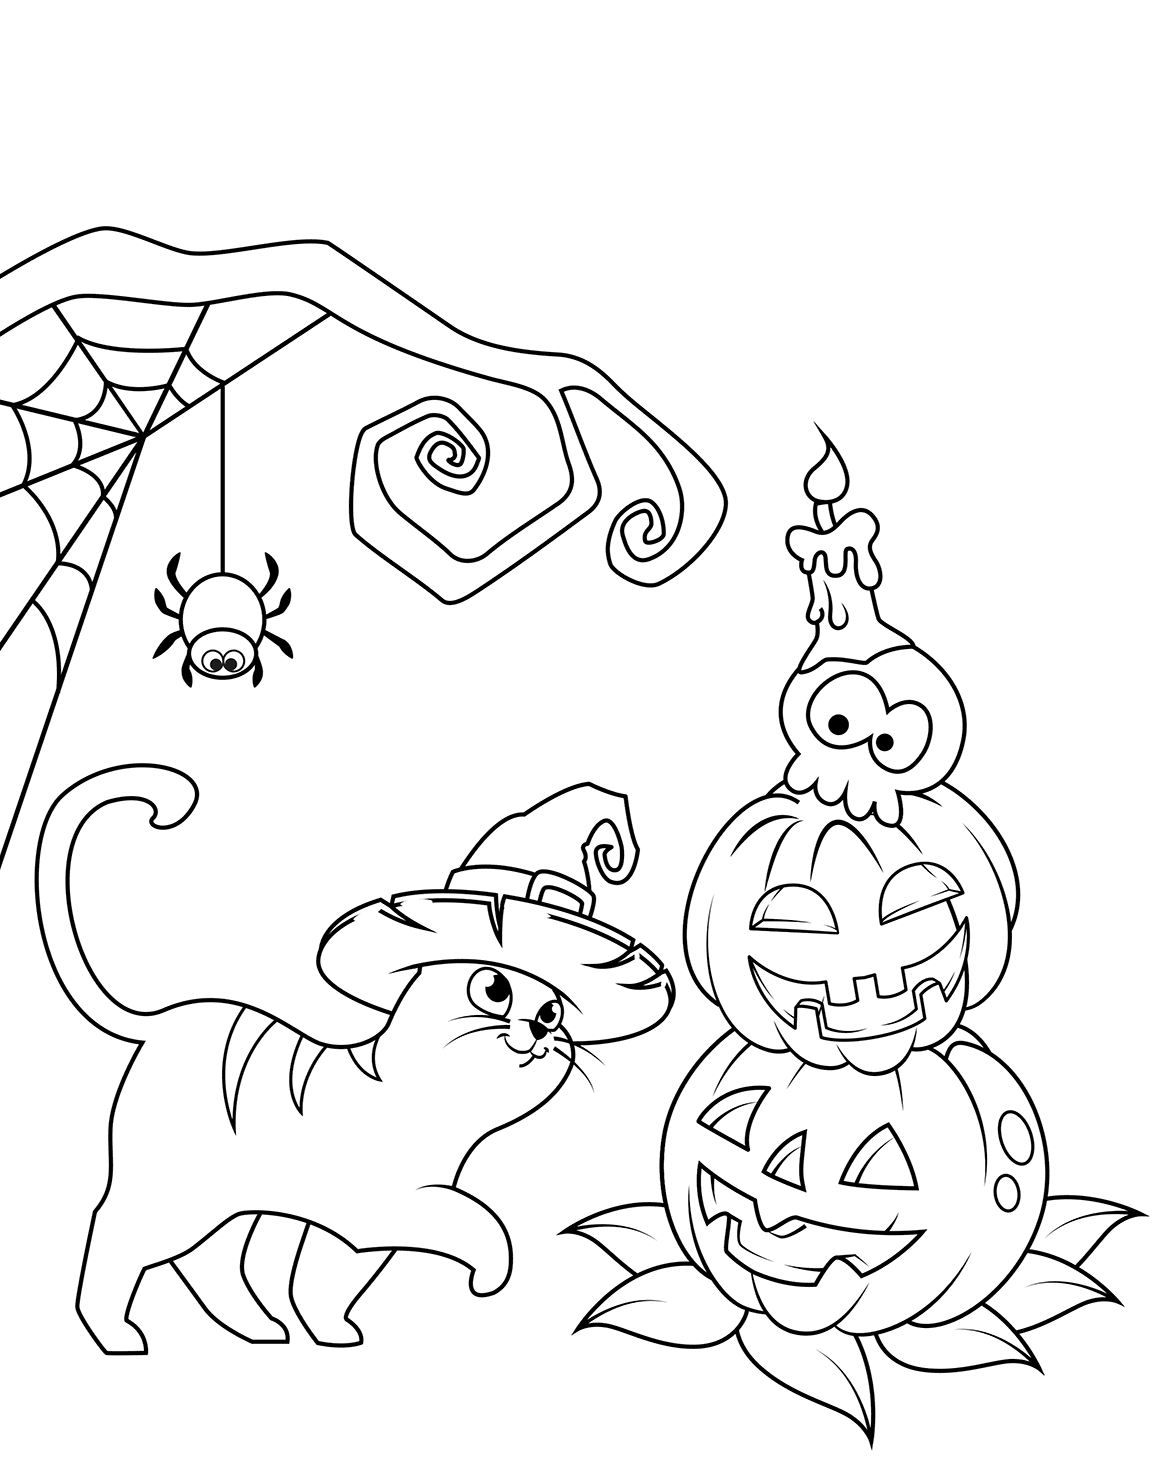 Cat And Jack O Lanterns Halloween Coloring Page